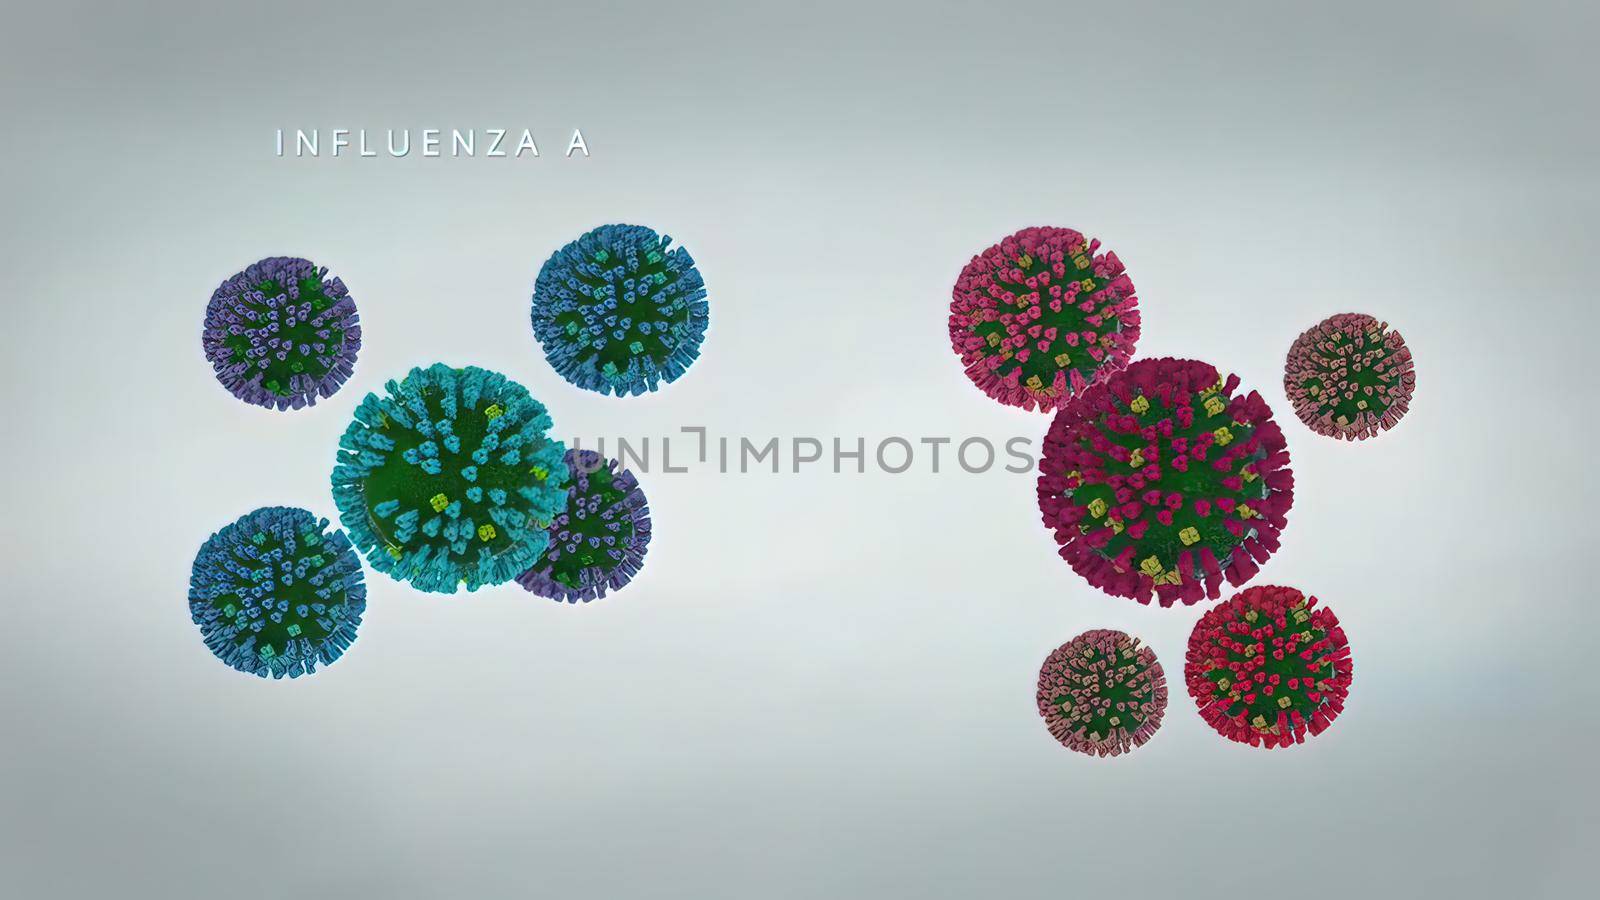 Influenza Virus Cells Looping by creativepic